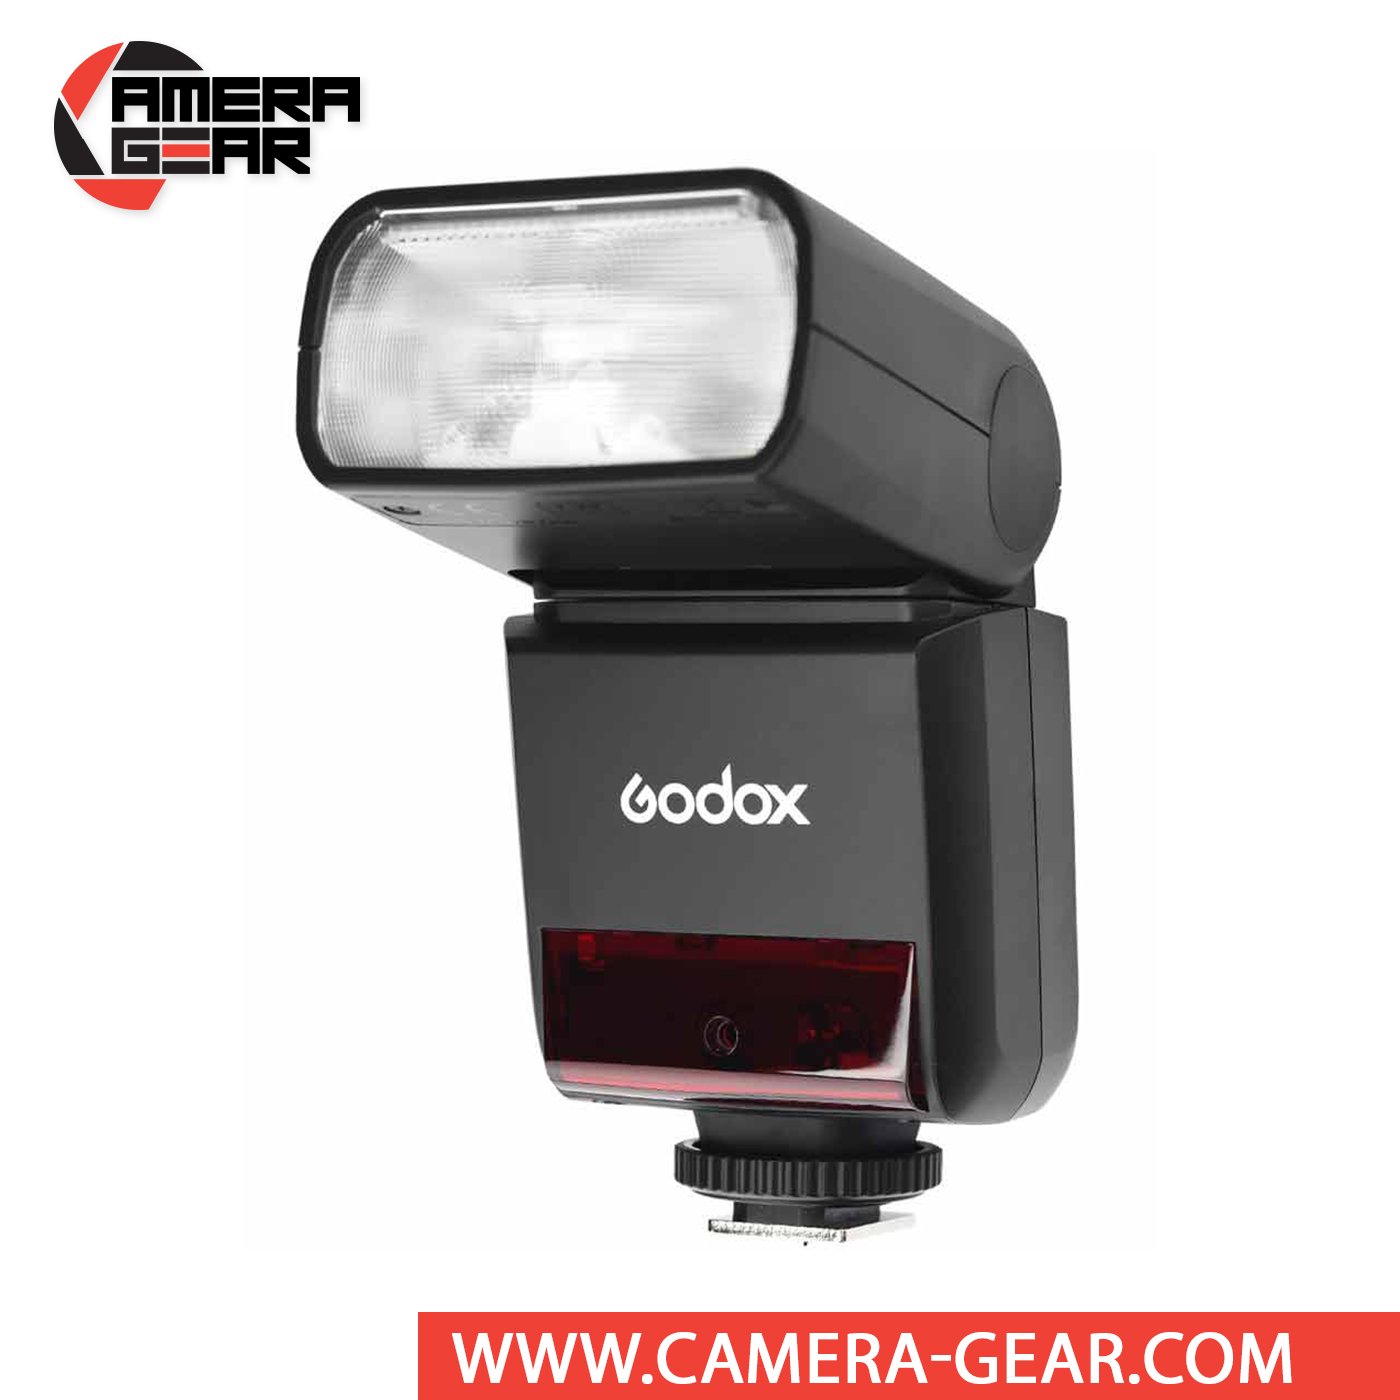 Flash godox • Compare (100+ products) find best prices »